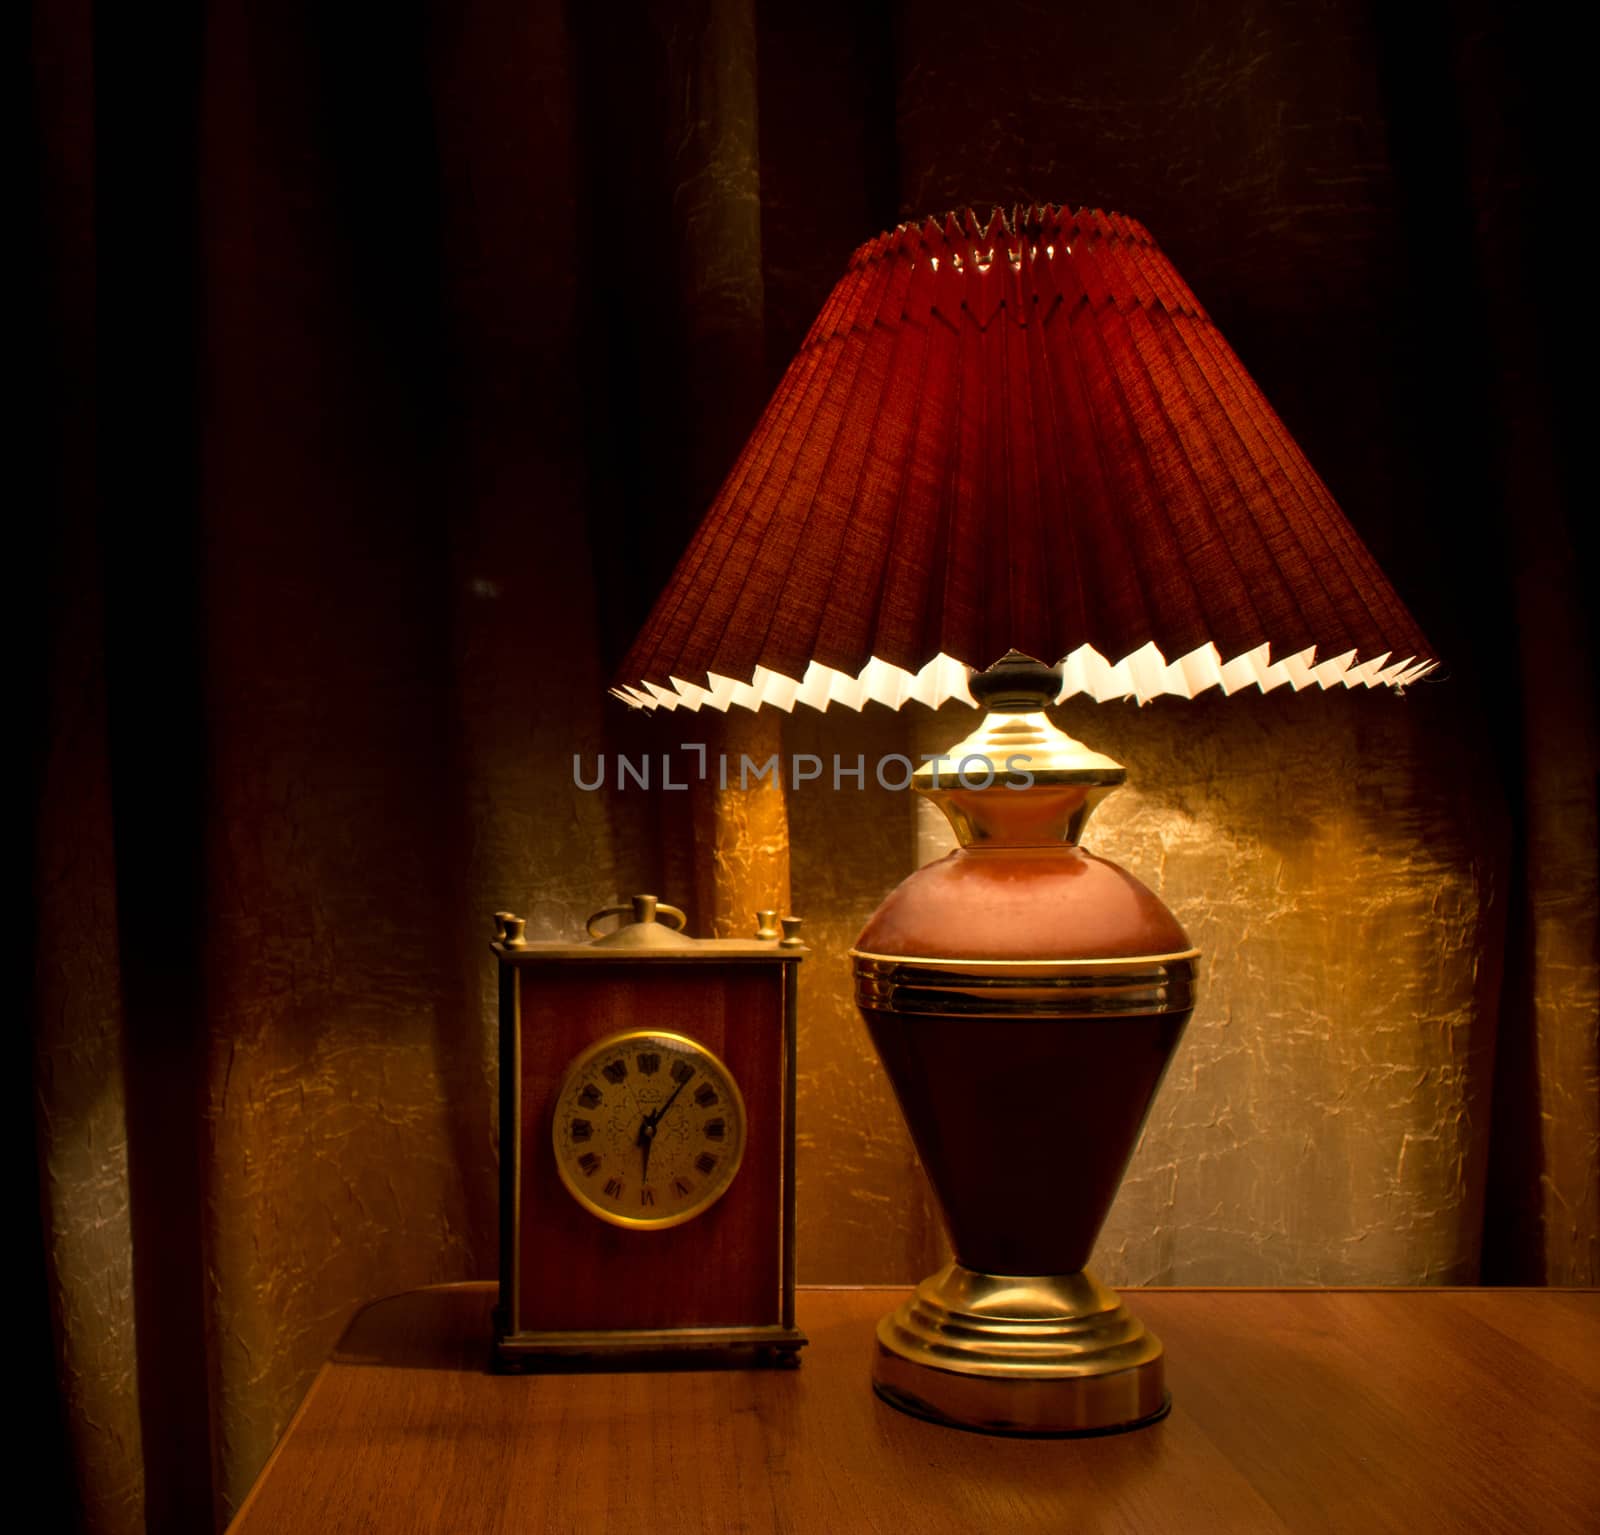 Old lamp and clock by liwei12